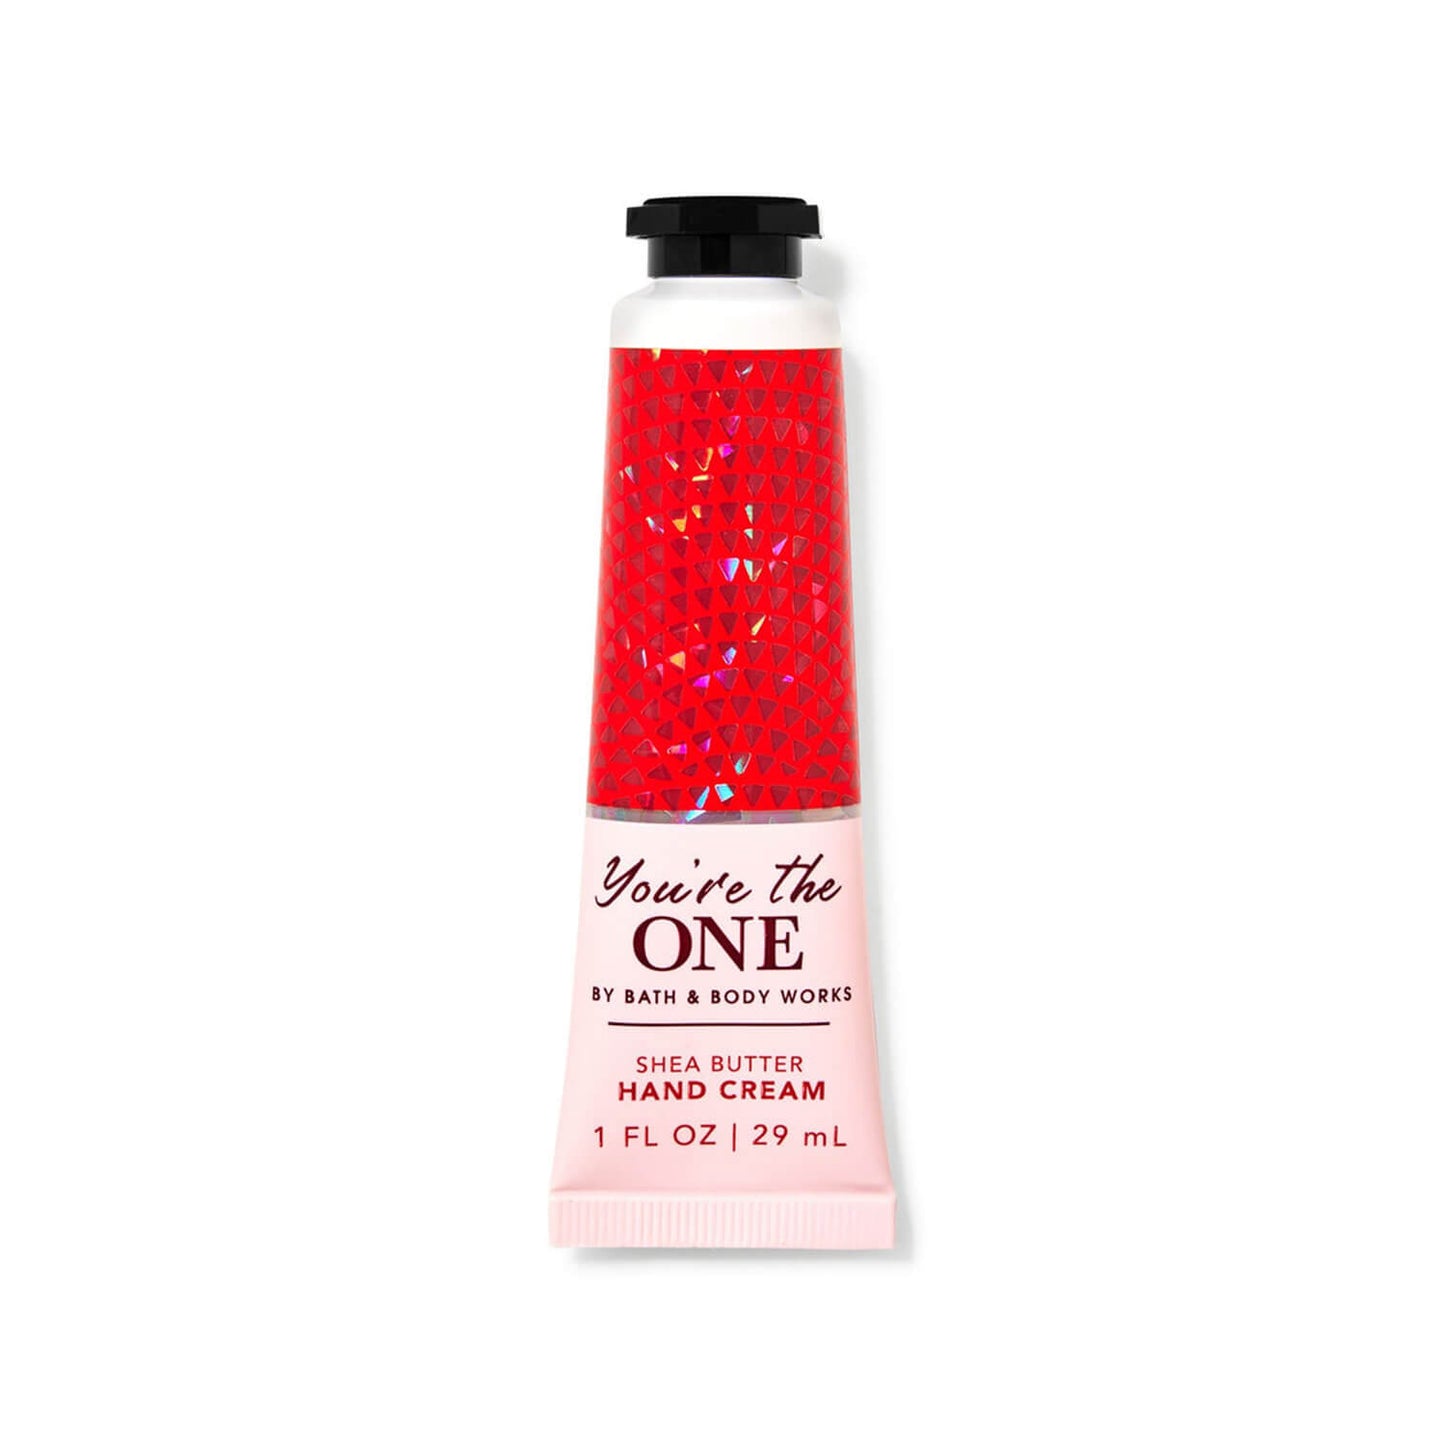 Bath and Body Works hand cream travel size you're the one available at Heygirl.pk for delivery in Karachi, Lahore, Islamabad across Pakistan. 